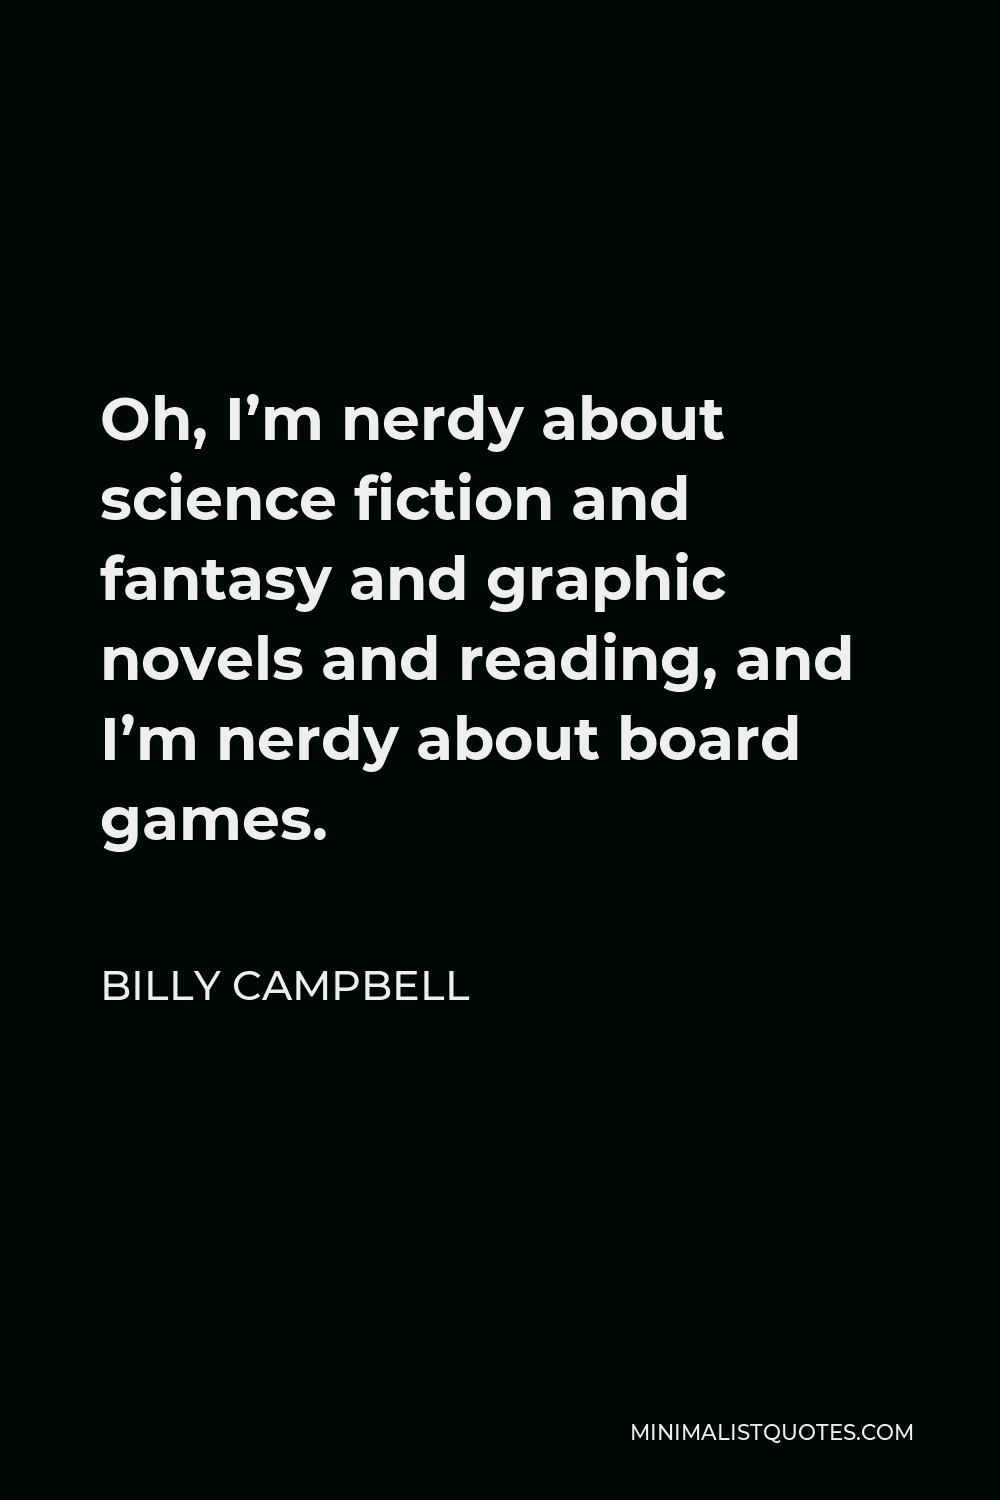 Billy Campbell Quote - Oh, I’m nerdy about science fiction and fantasy and graphic novels and reading, and I’m nerdy about board games.